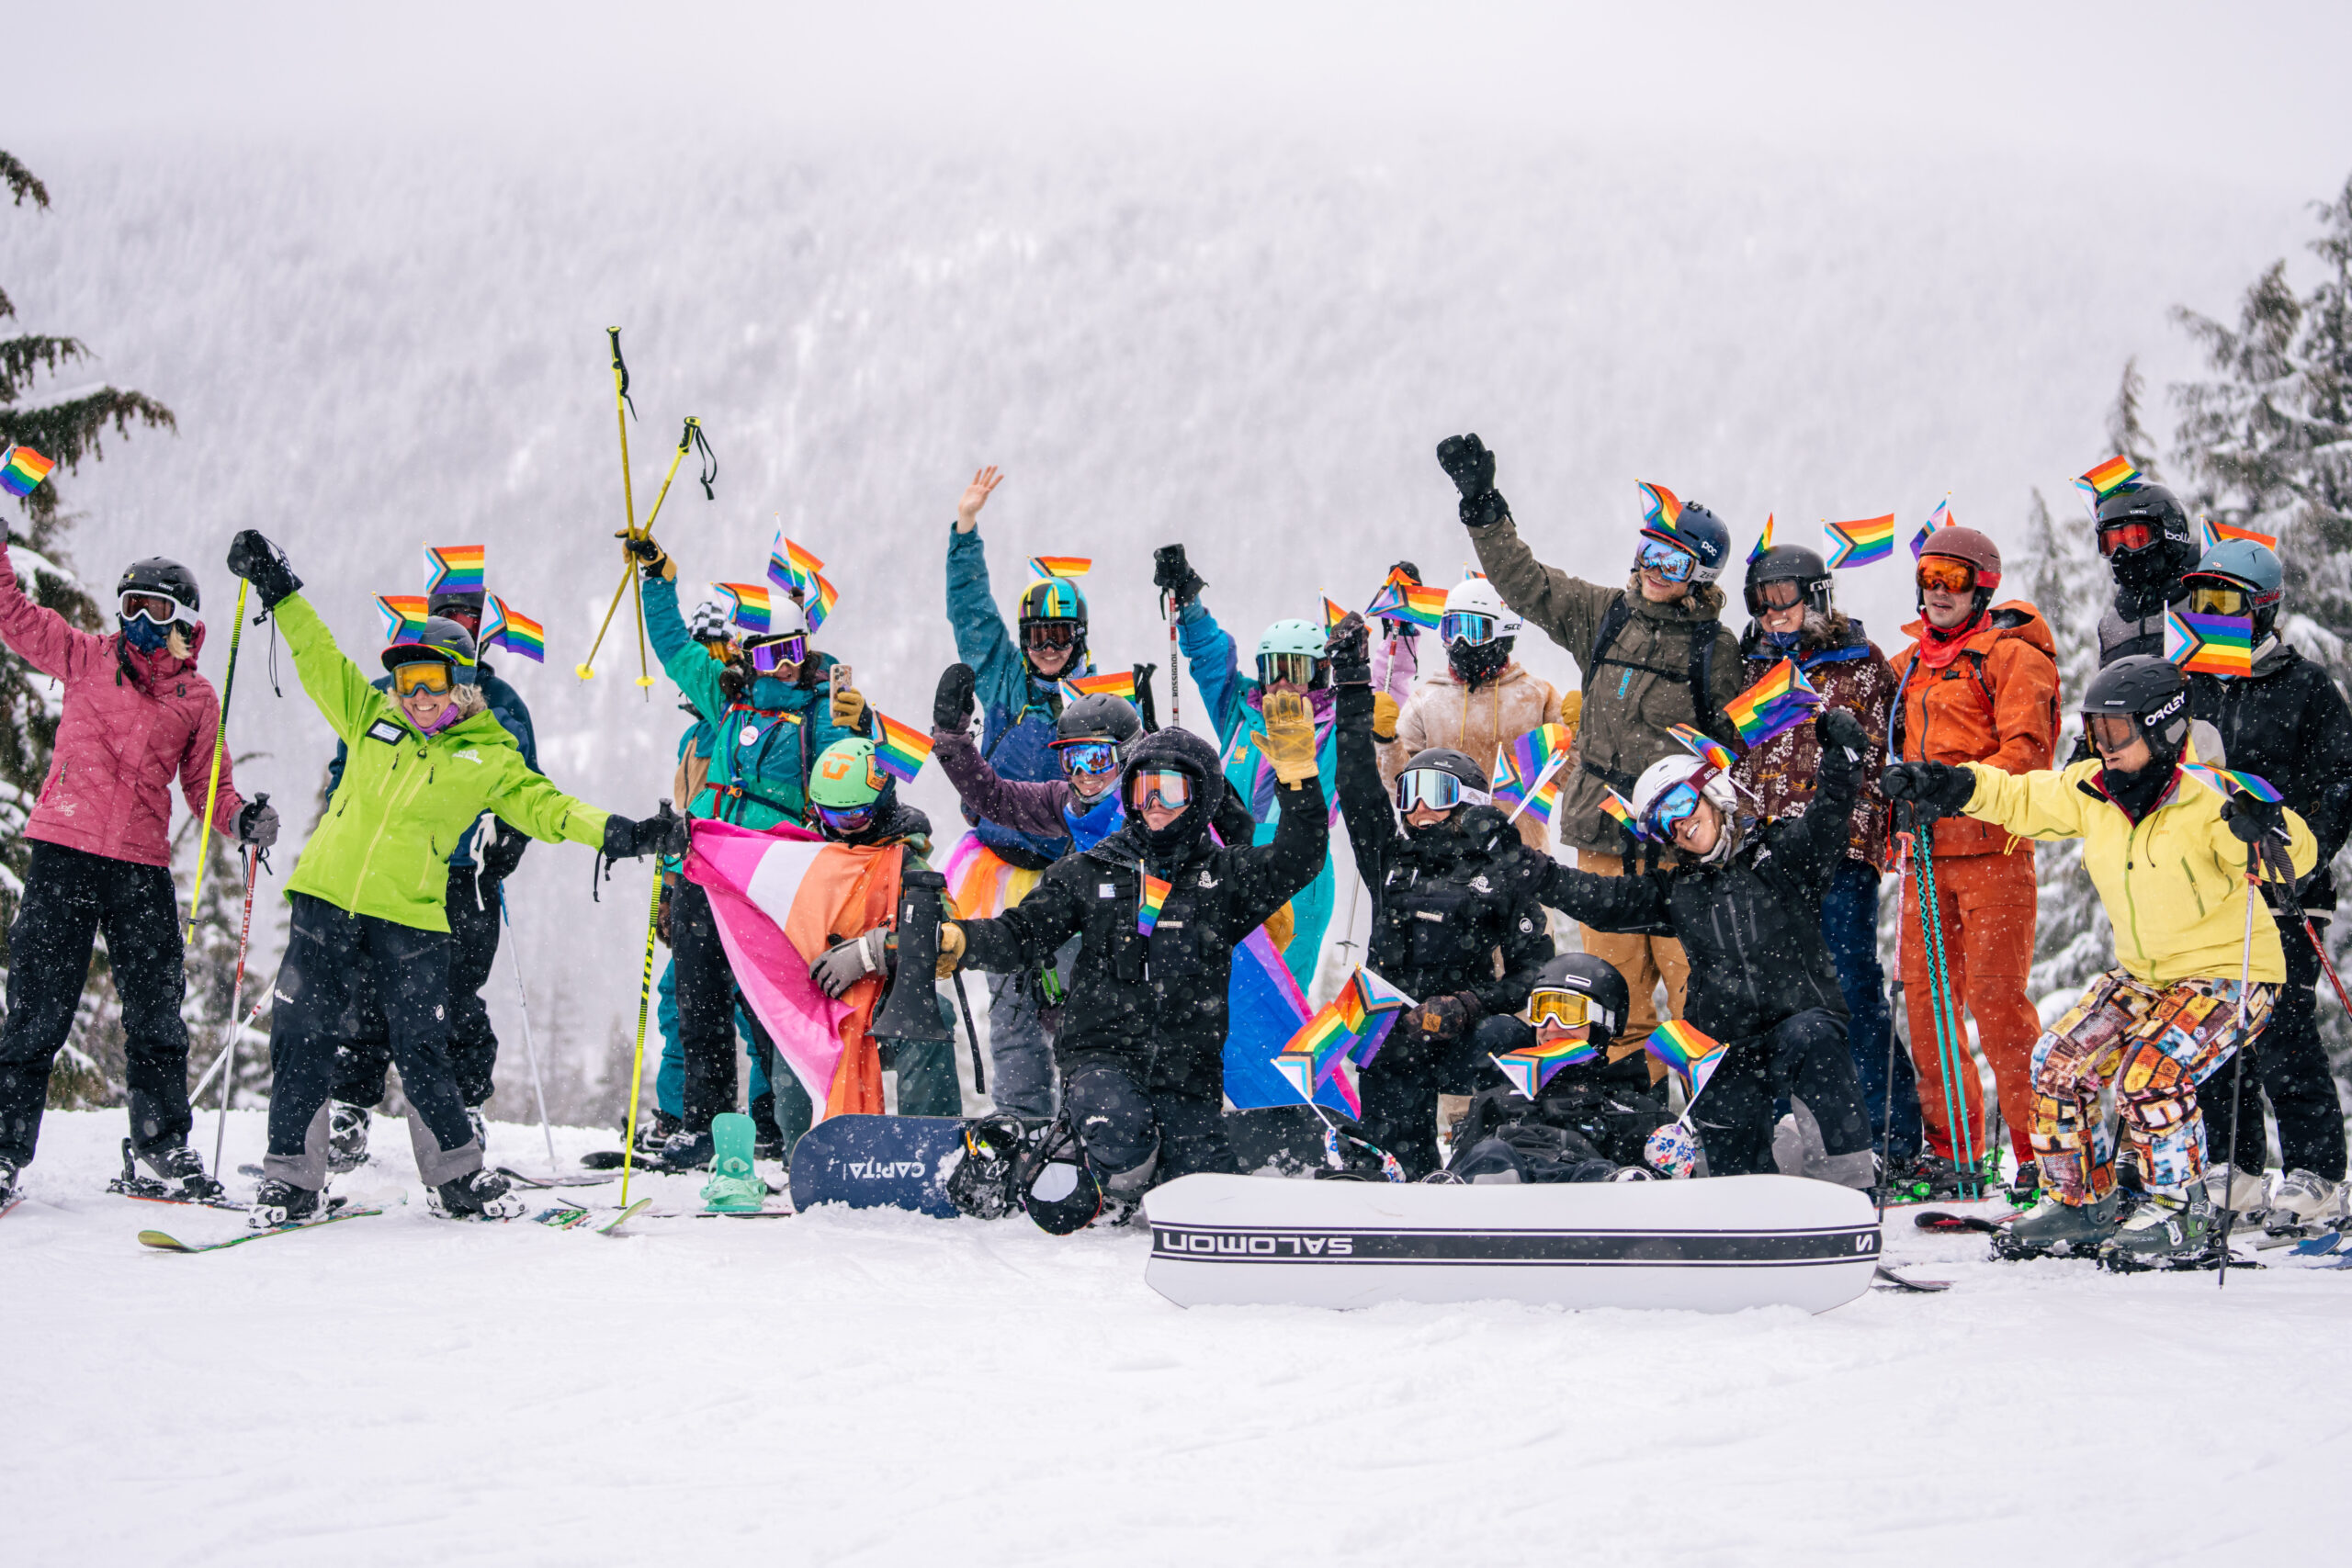 LGBTQ+ skiiers and snowboarders celebrating outside on a snowy mountian